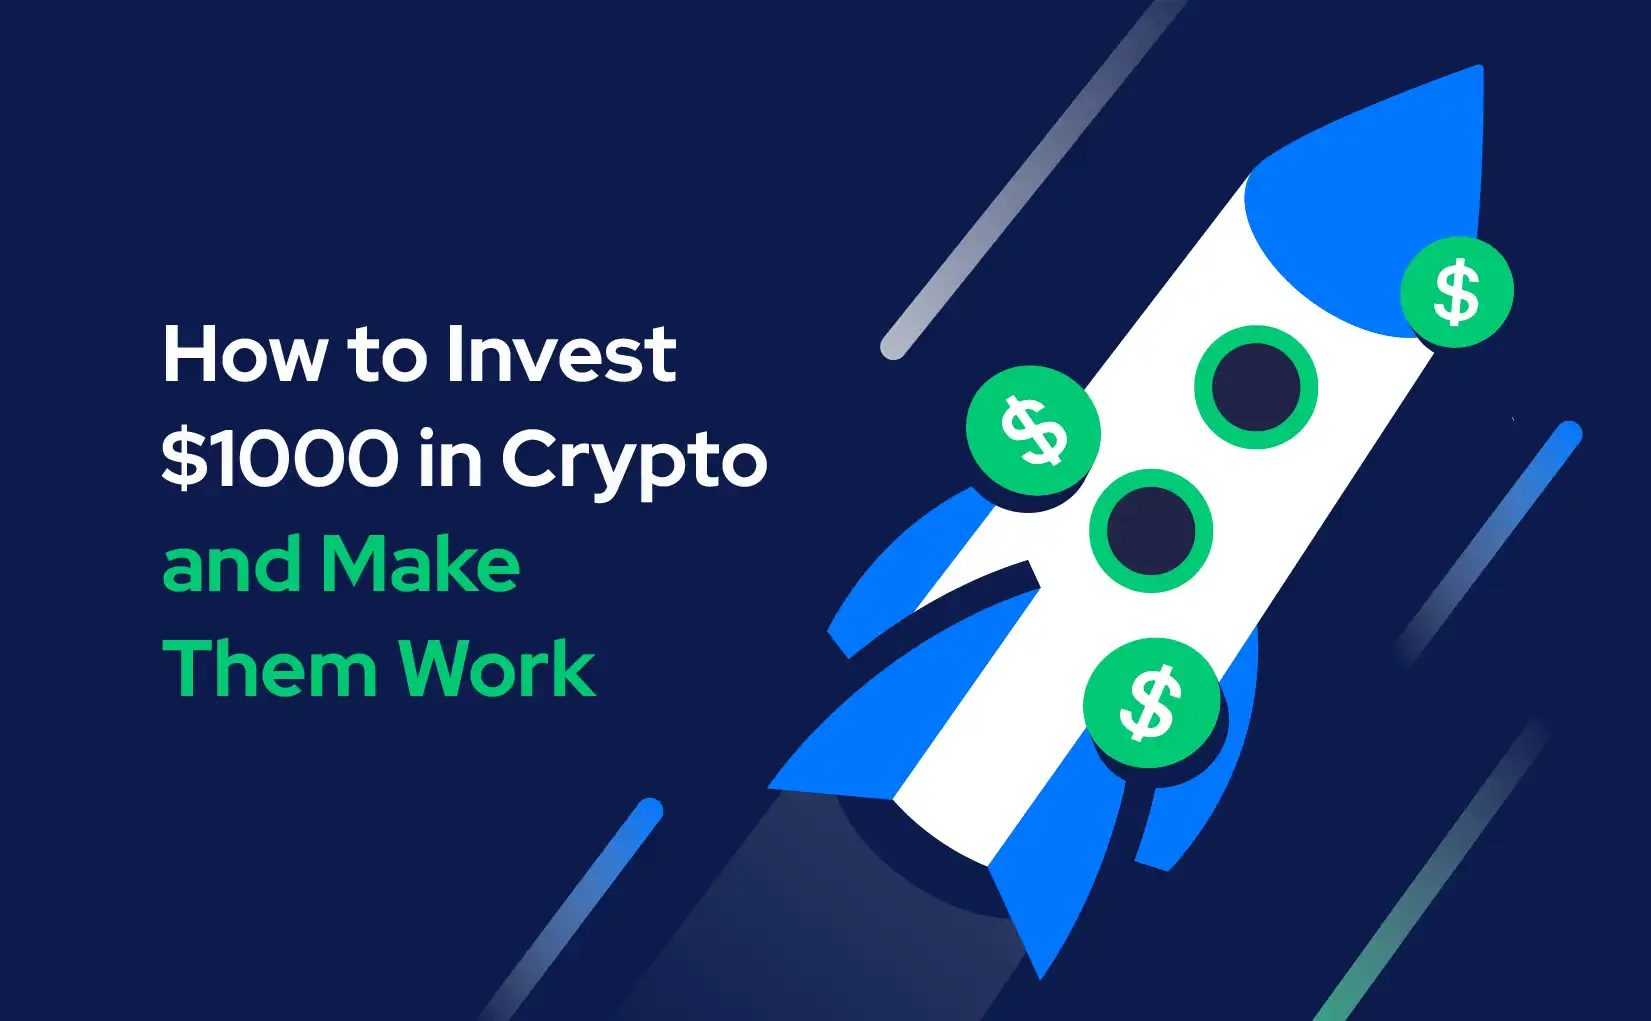 How to Invest $1000 in Crypto and Make Them Work